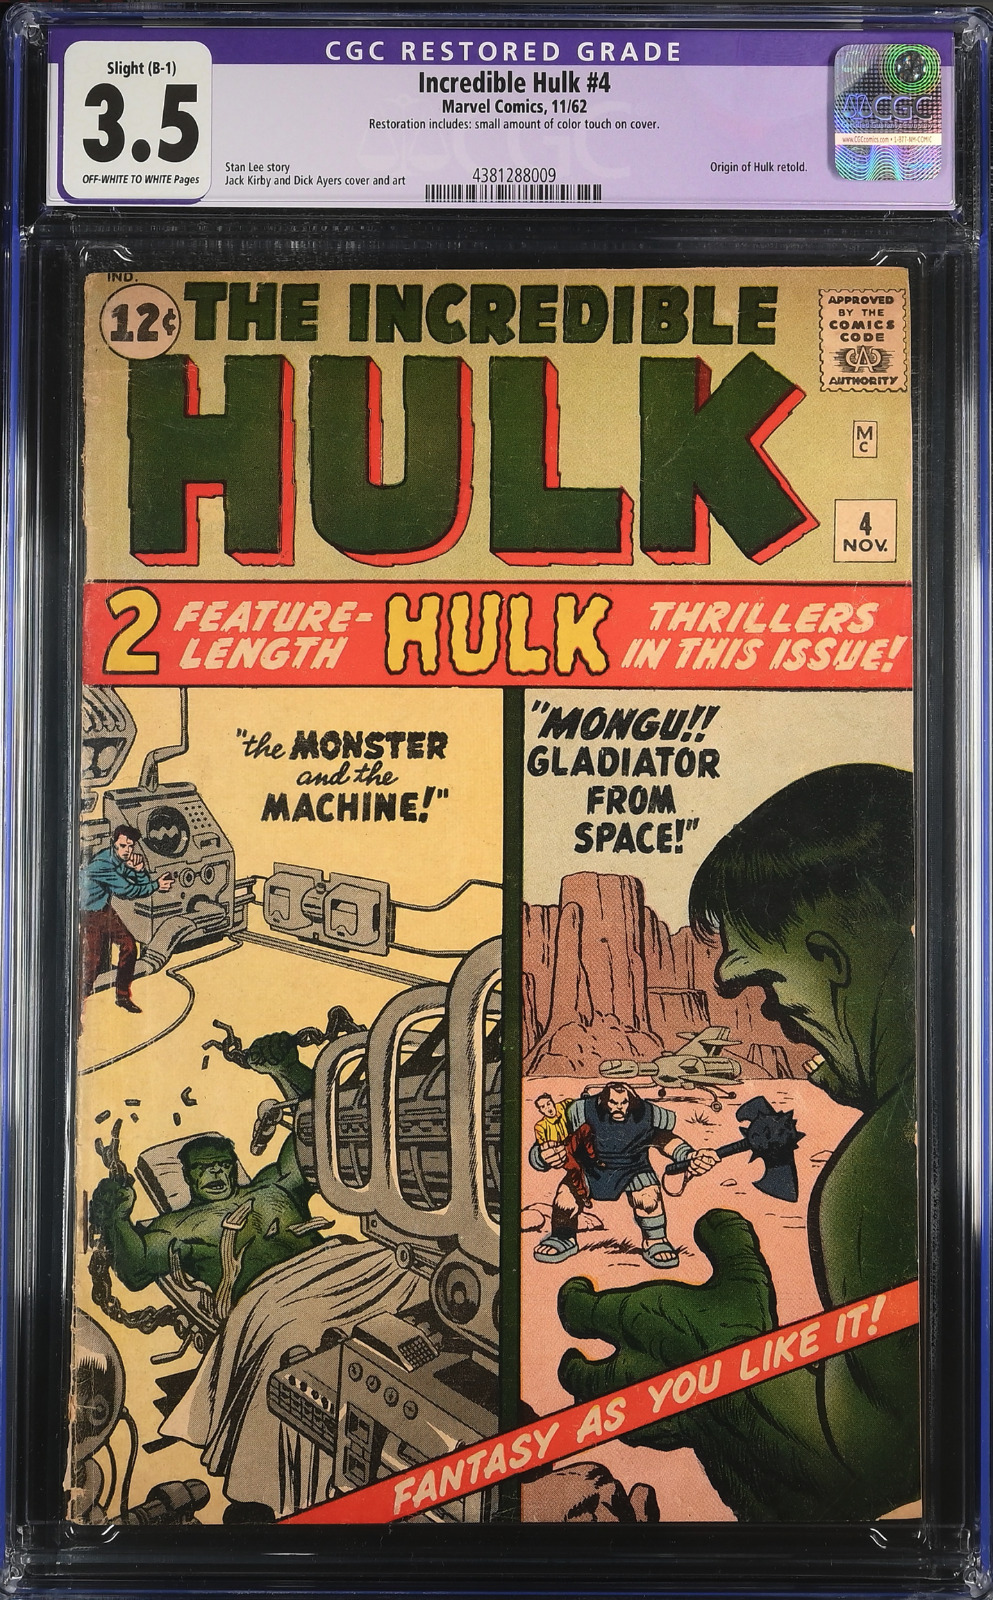 THE INCREDIBLE HULK #4 NOV 1962 CGC 3.5 OW/W PAGES *RESTORED* ORIGIN RETOLD